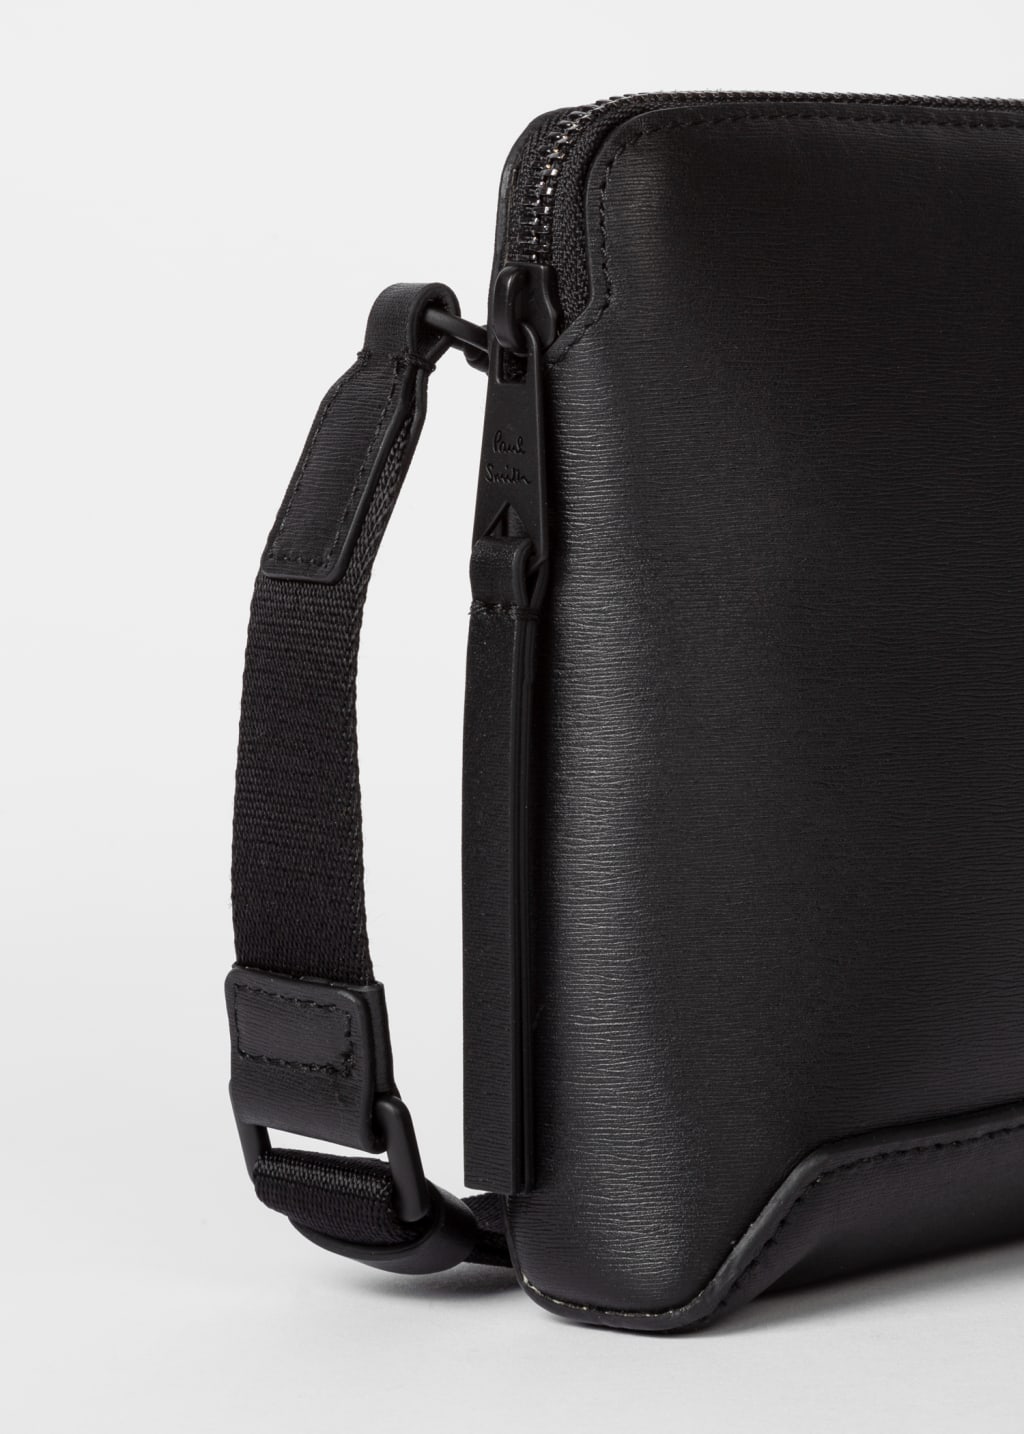 Detail View - Black Embossed Leather Musette Bag Paul Smith